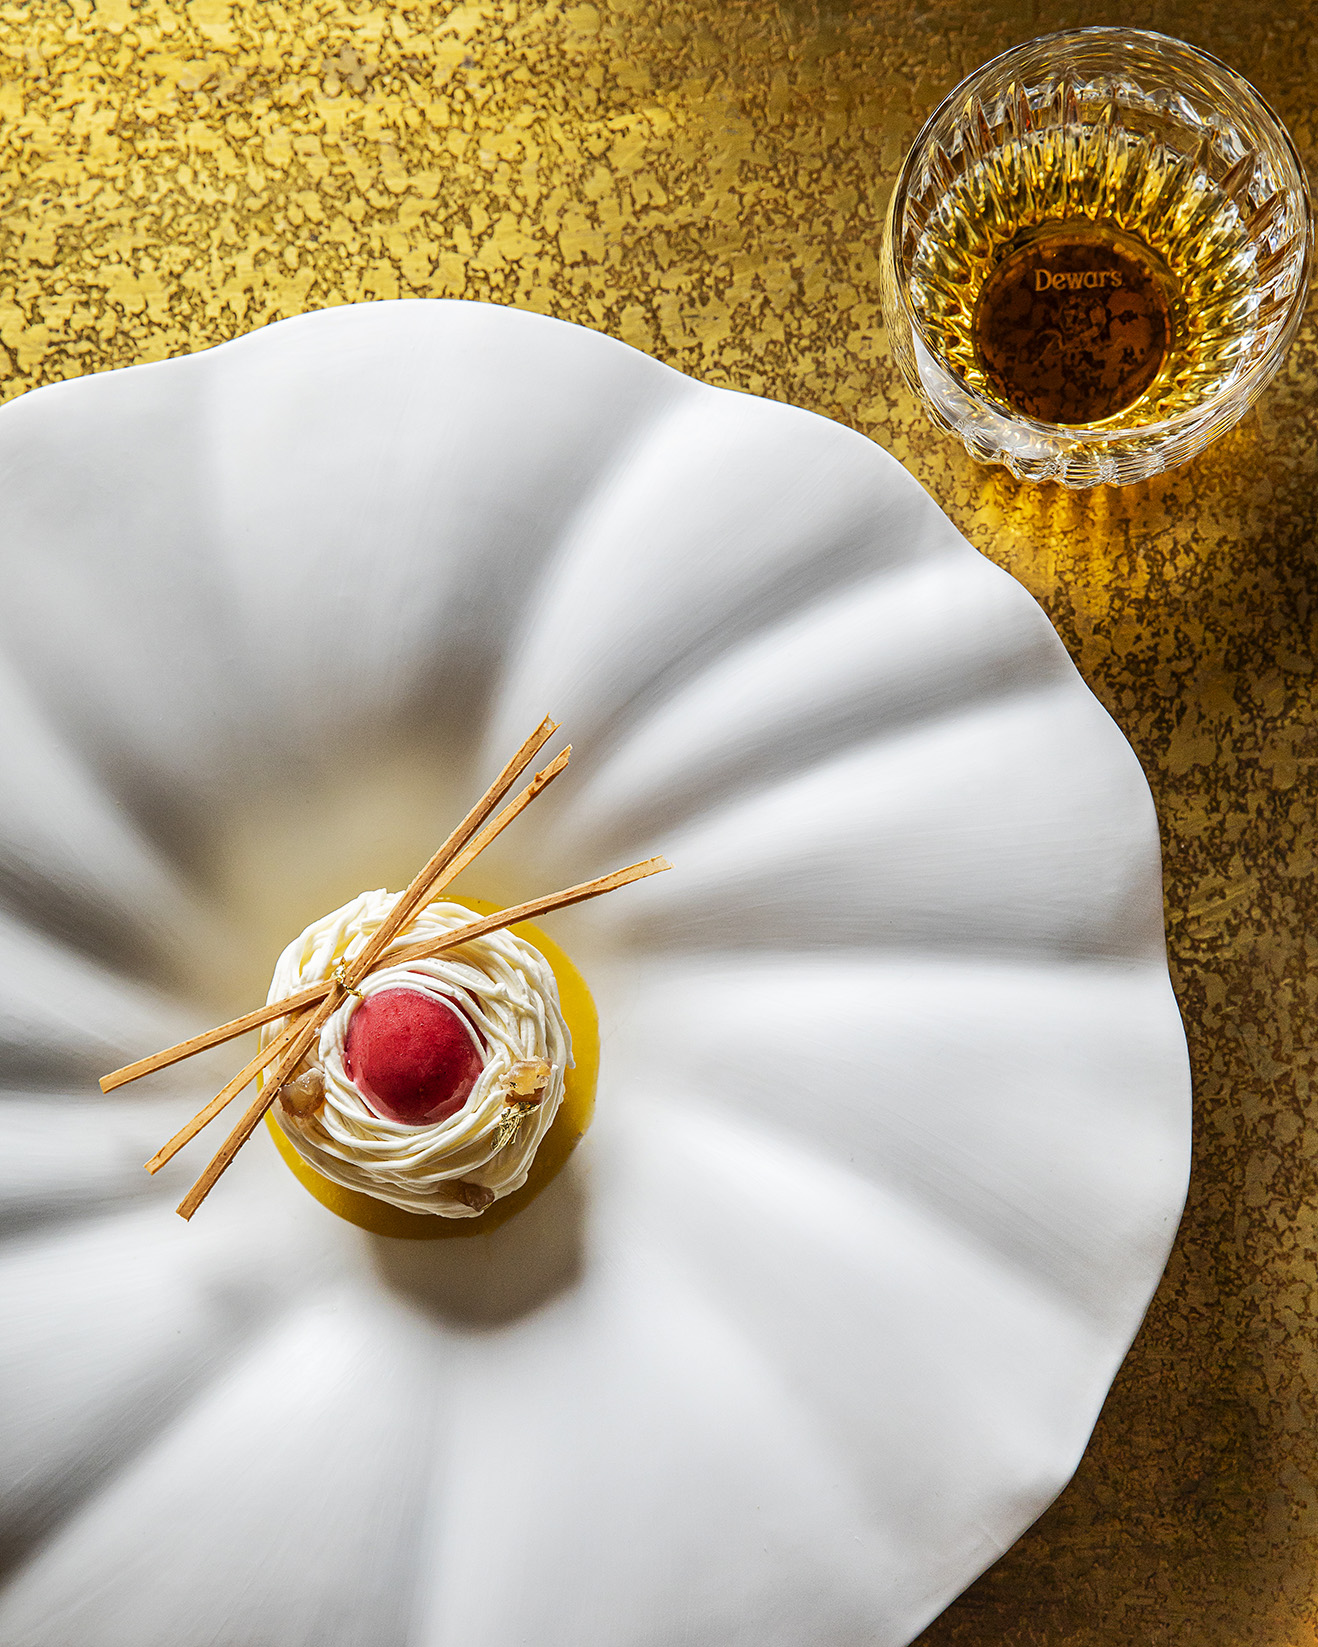 Chestnut Crème "Tobacco Chantilly" Red Currant Sorbet with the pairing of DEWAR'S Double Double 37-Year-Old